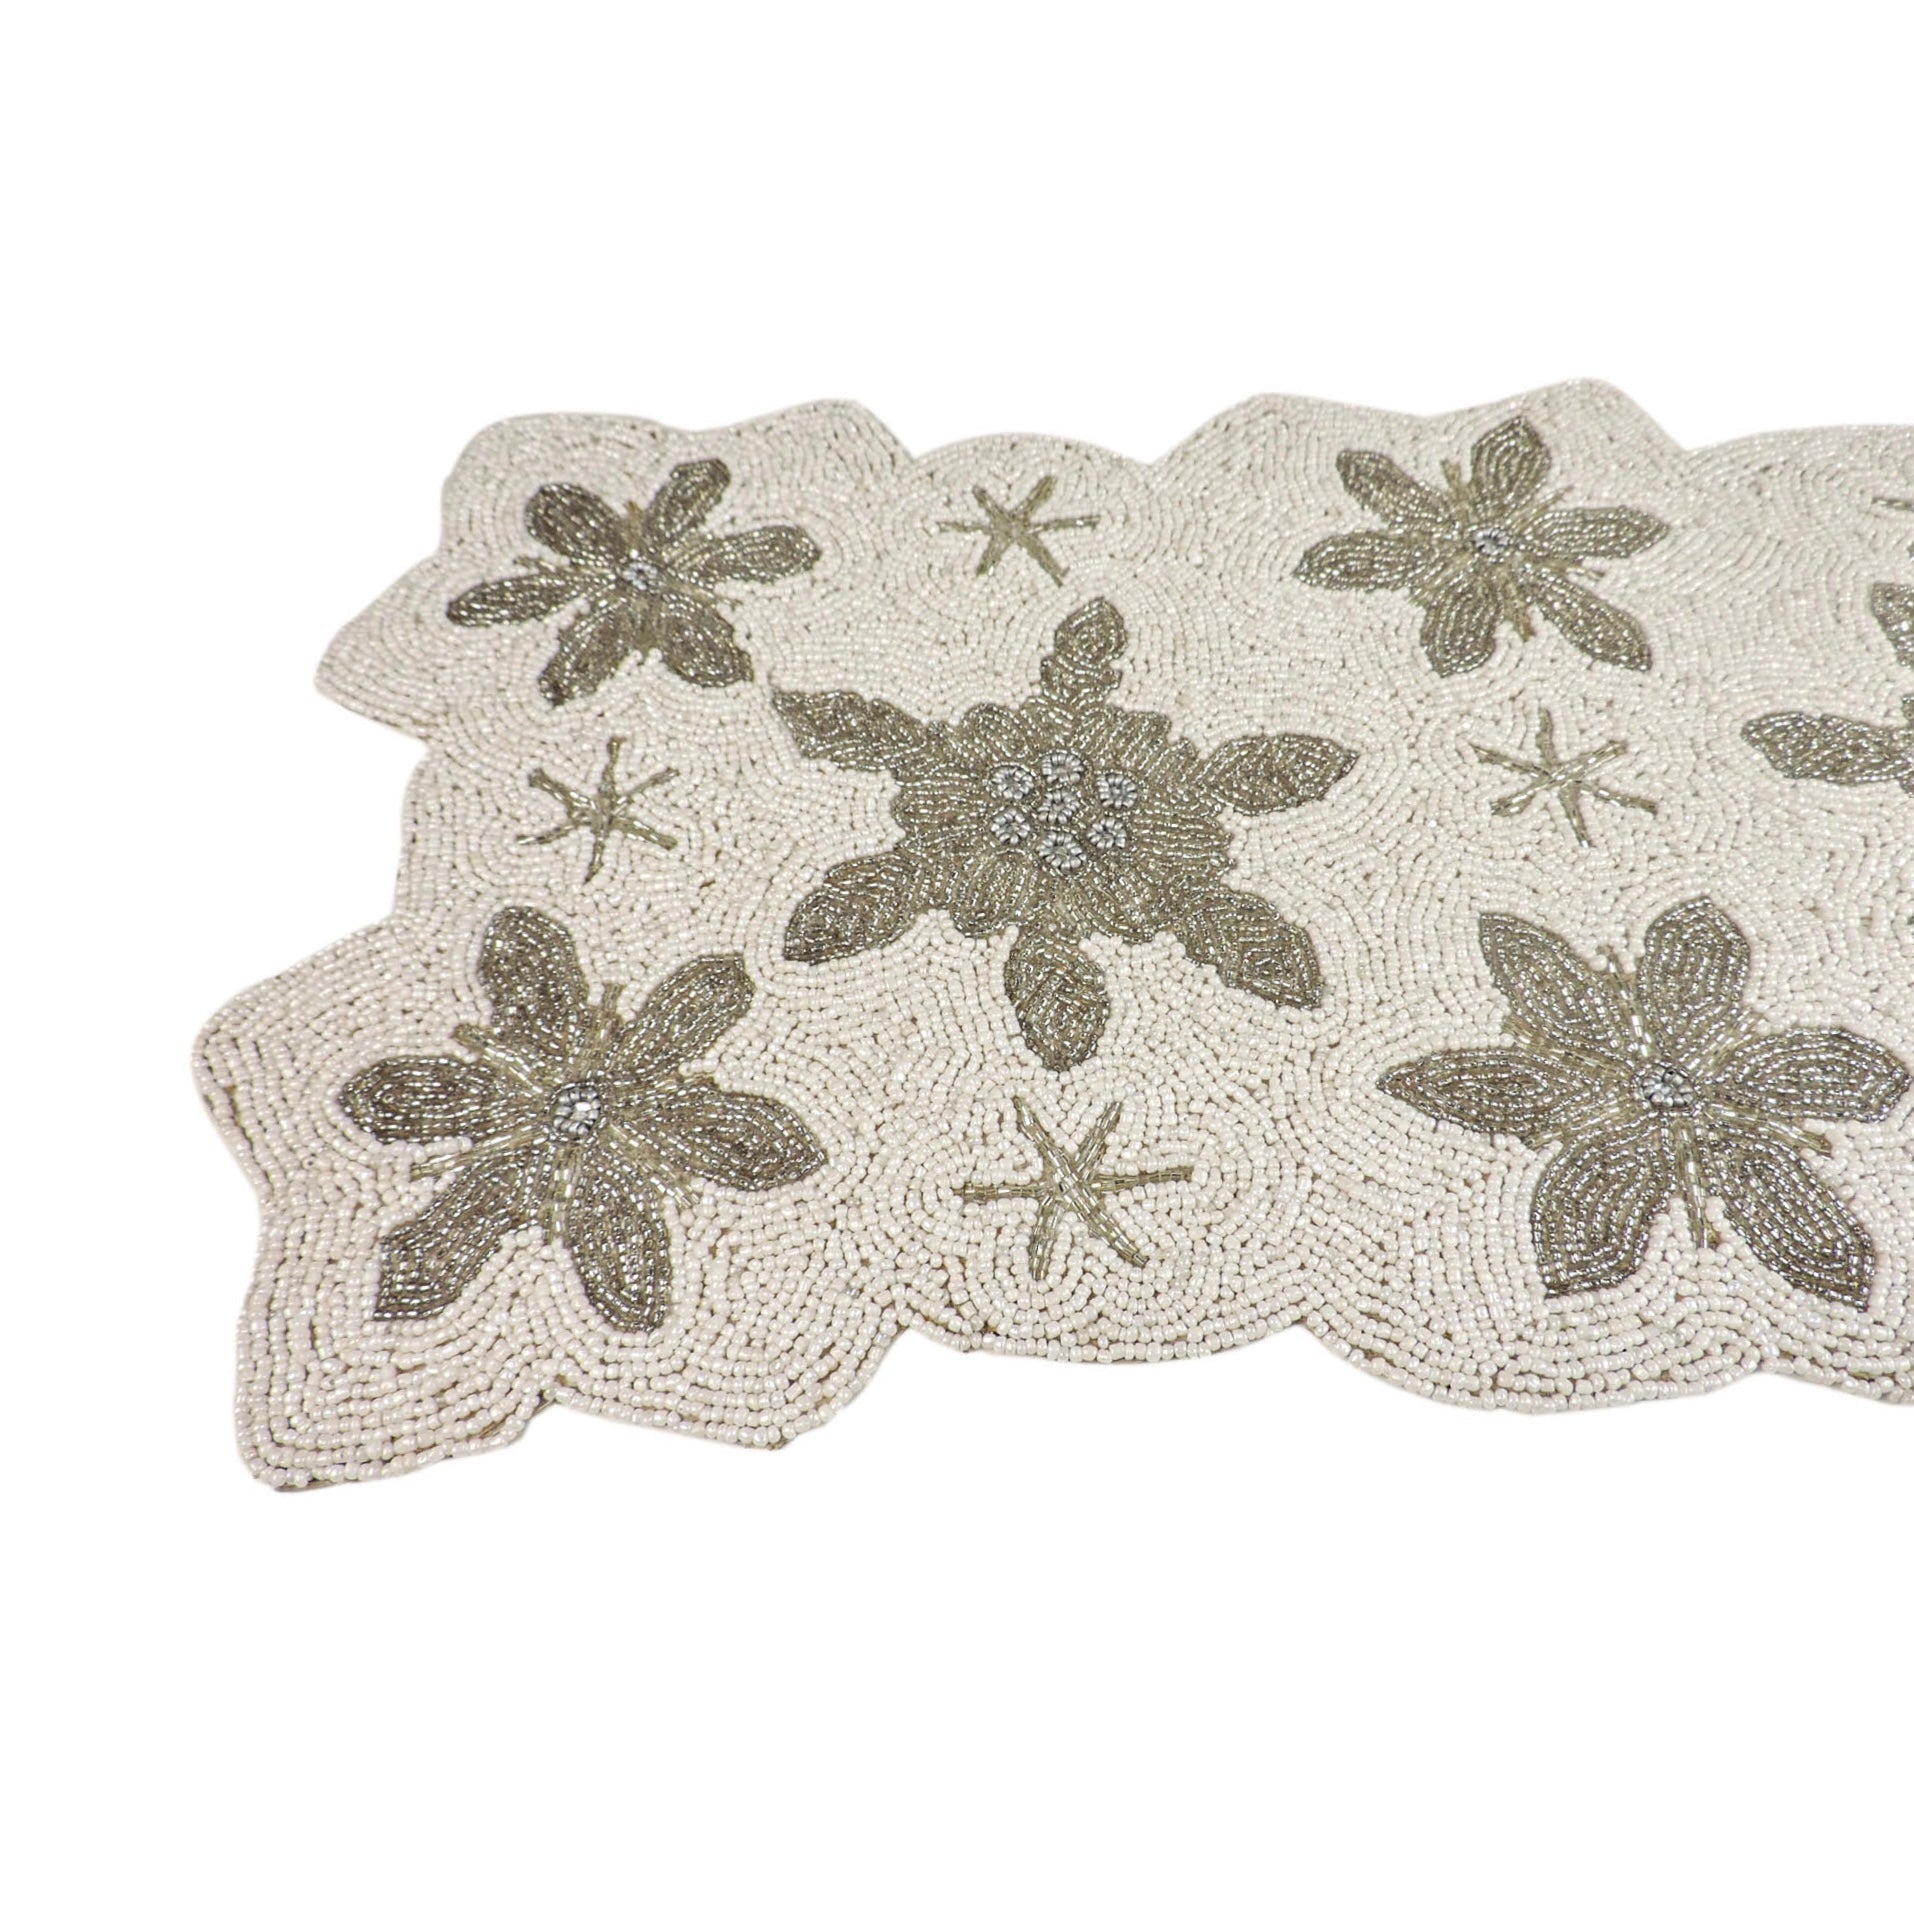 Let it Snow Bead Embroidered Table Runner<br>Color: White & Silver<br>Size: 36"xSize: 13"